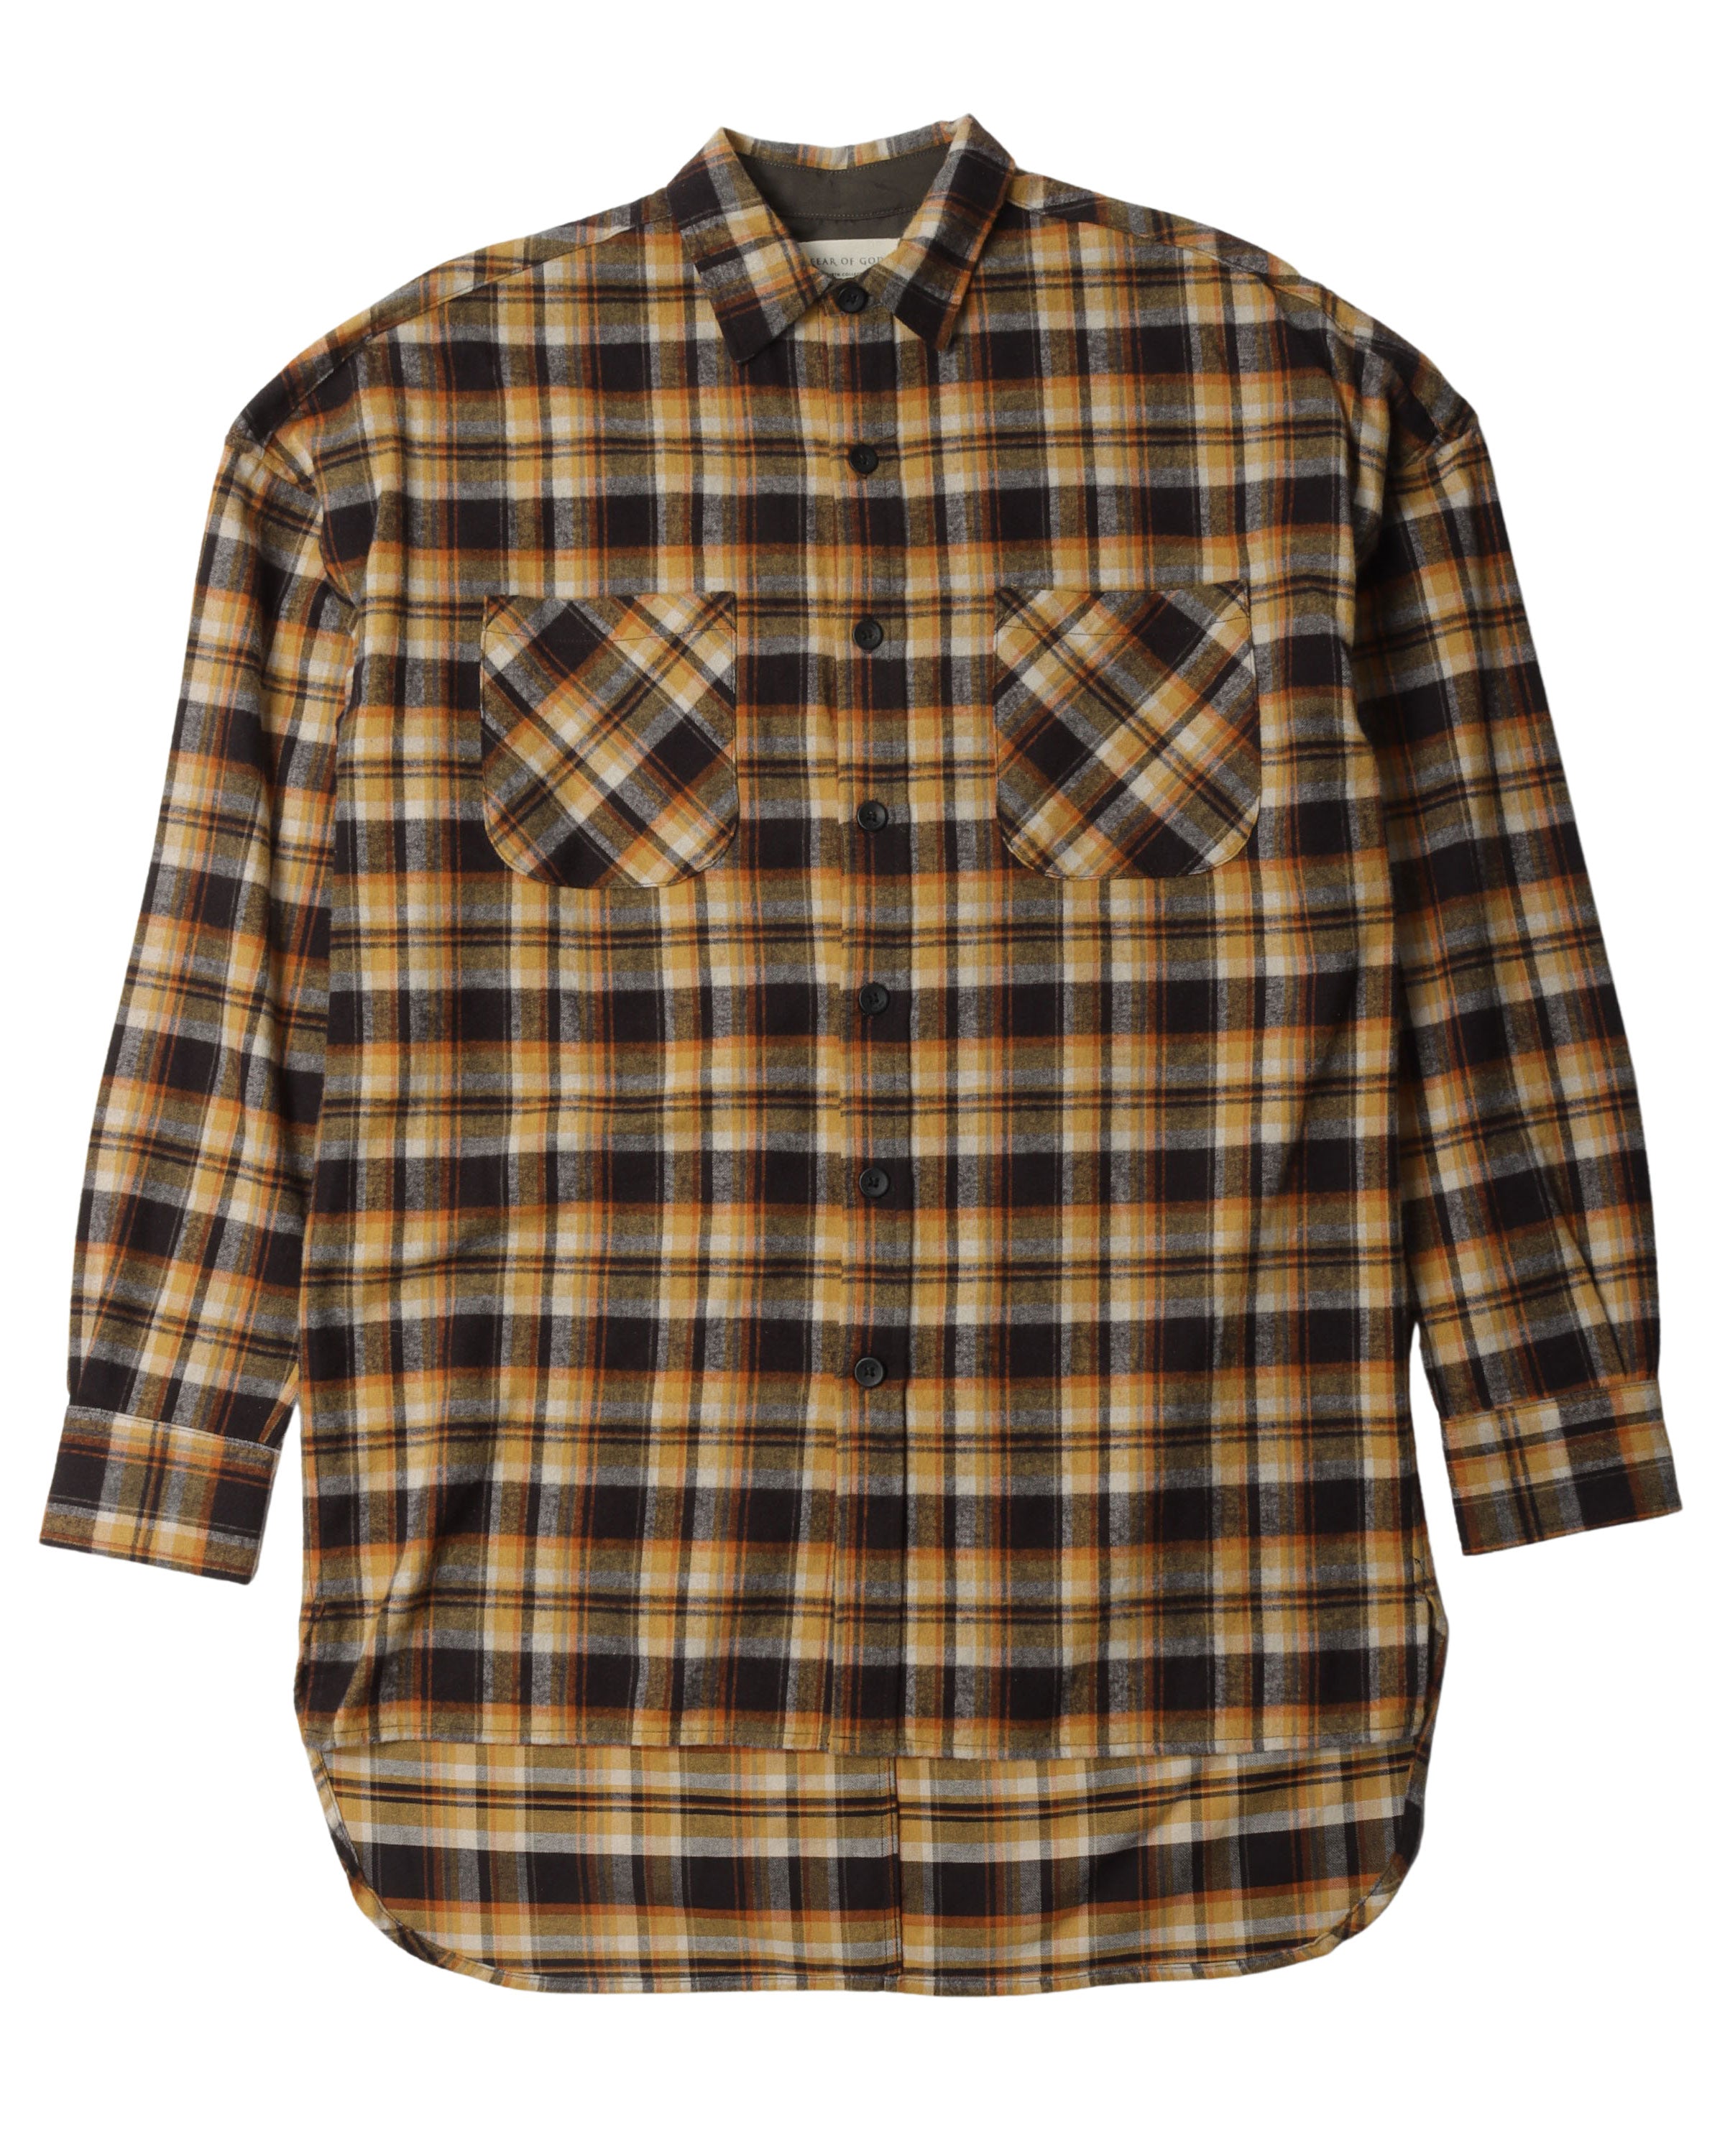 Fear of God Fourth Collection Flannel Shirt